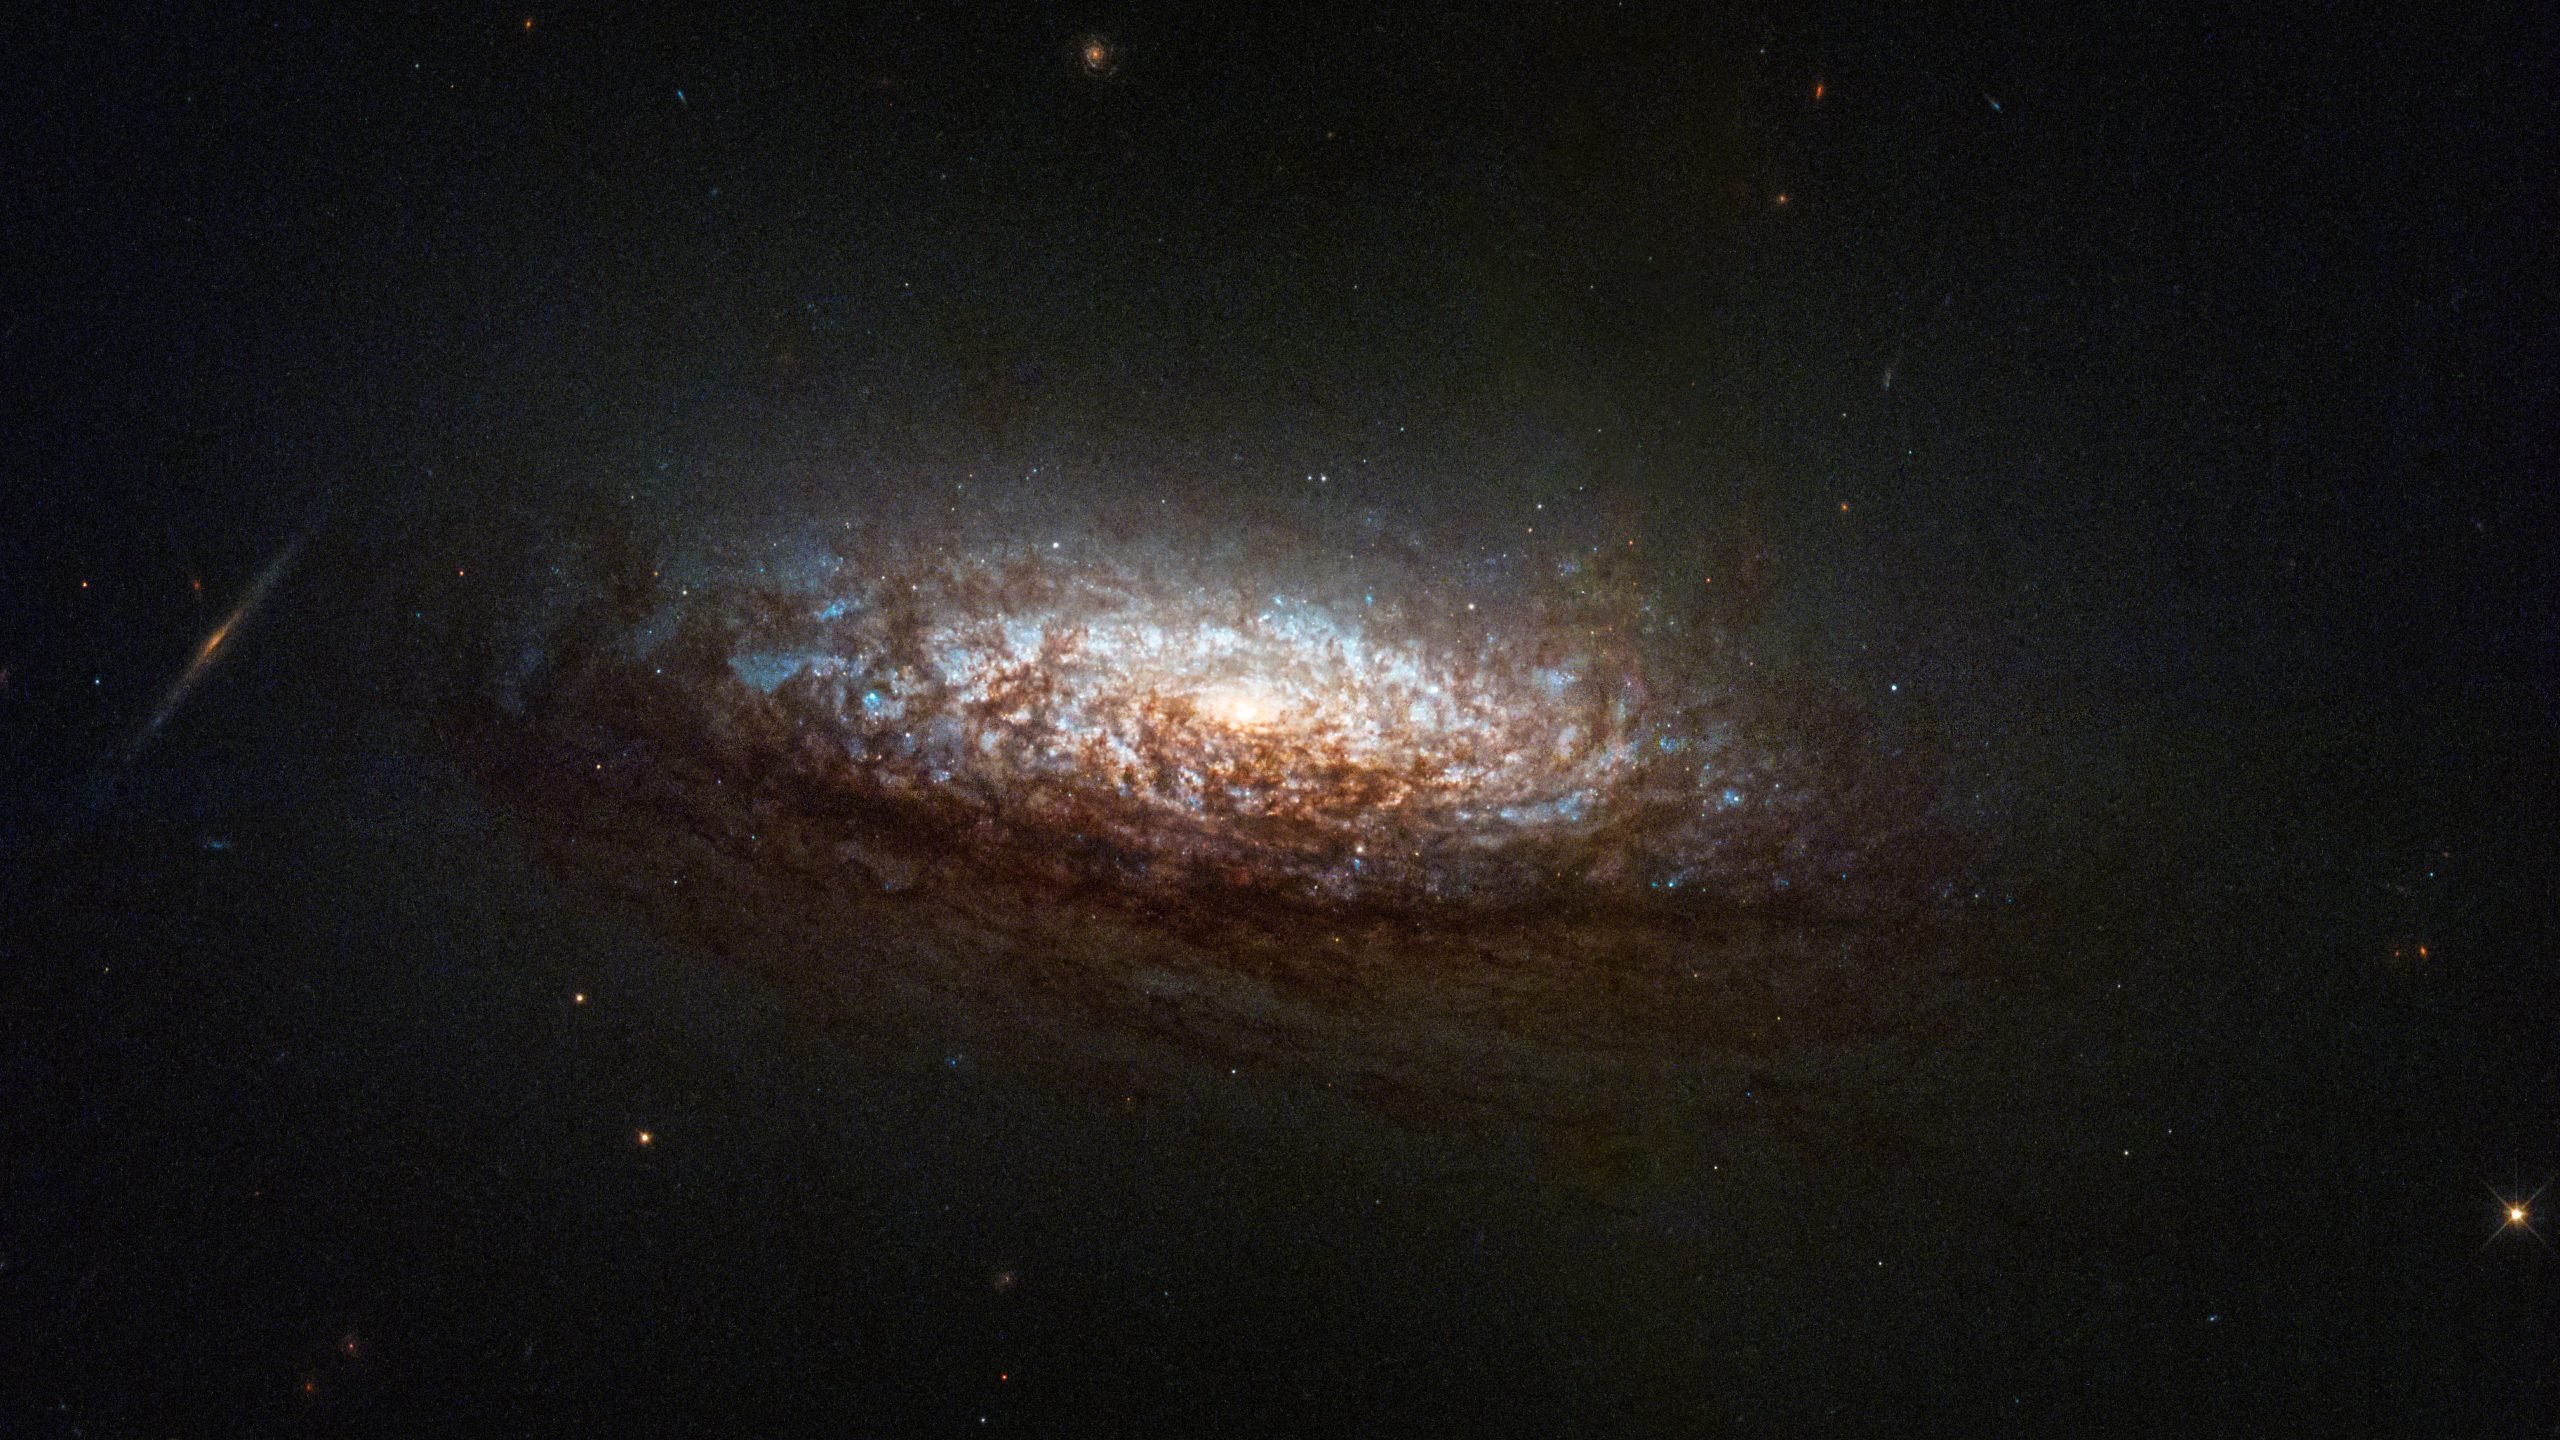 This is the first Hubble image after recent malfunction